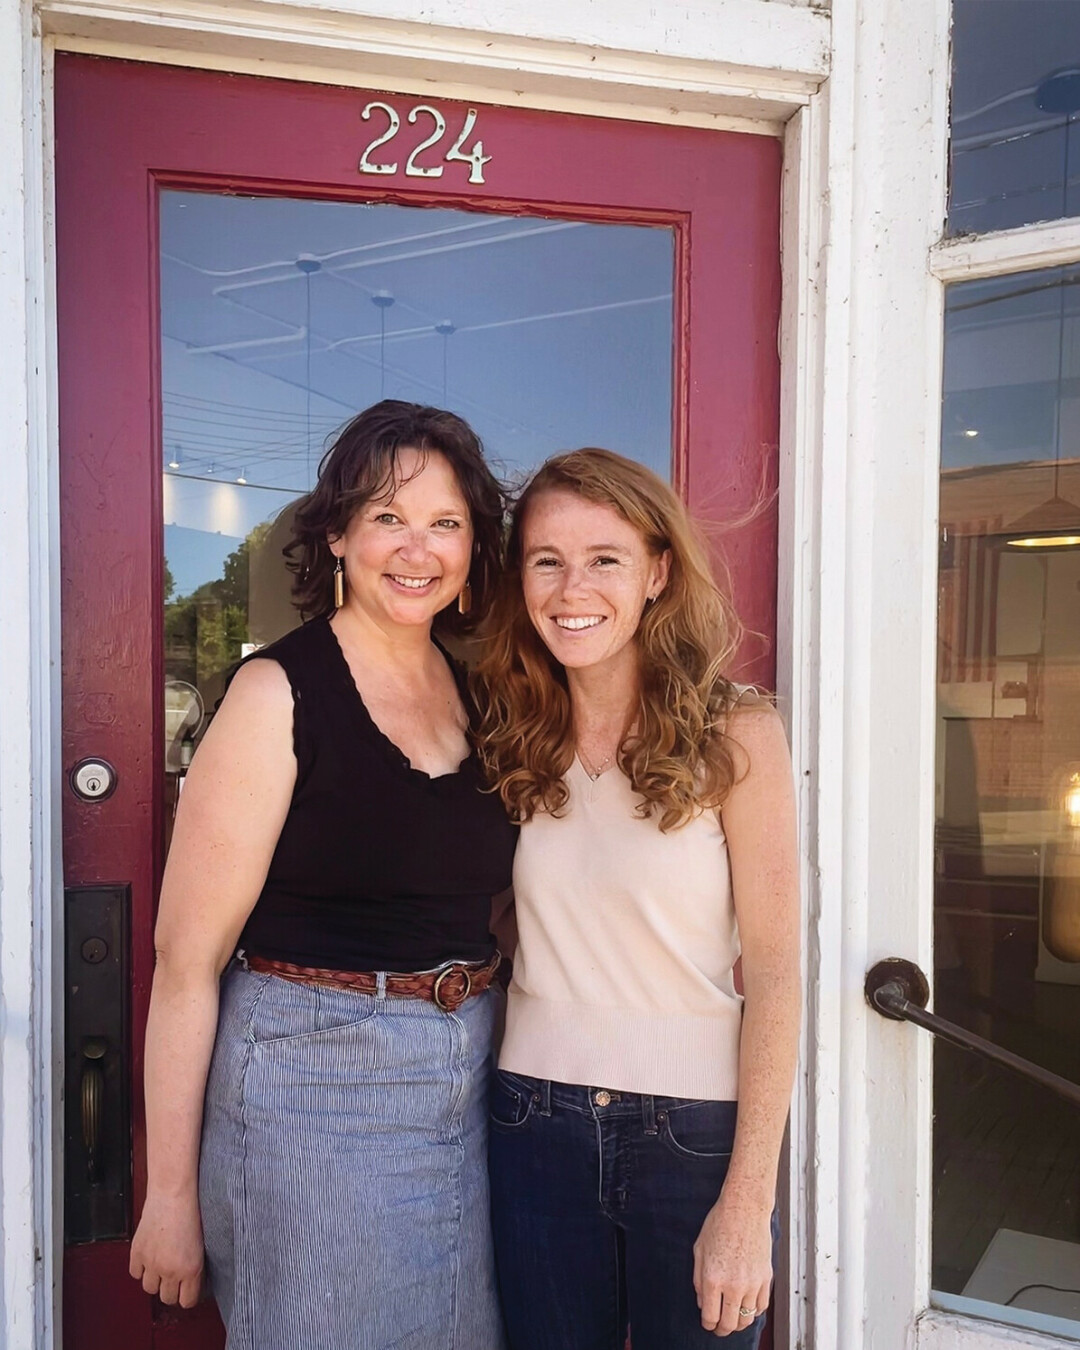 Sarah (left) and Rebecca (right) pictured above, the photo used in their social media announcement of Hive + Hollow's soon-to-be residence in what has long since been Red's Mercantile.